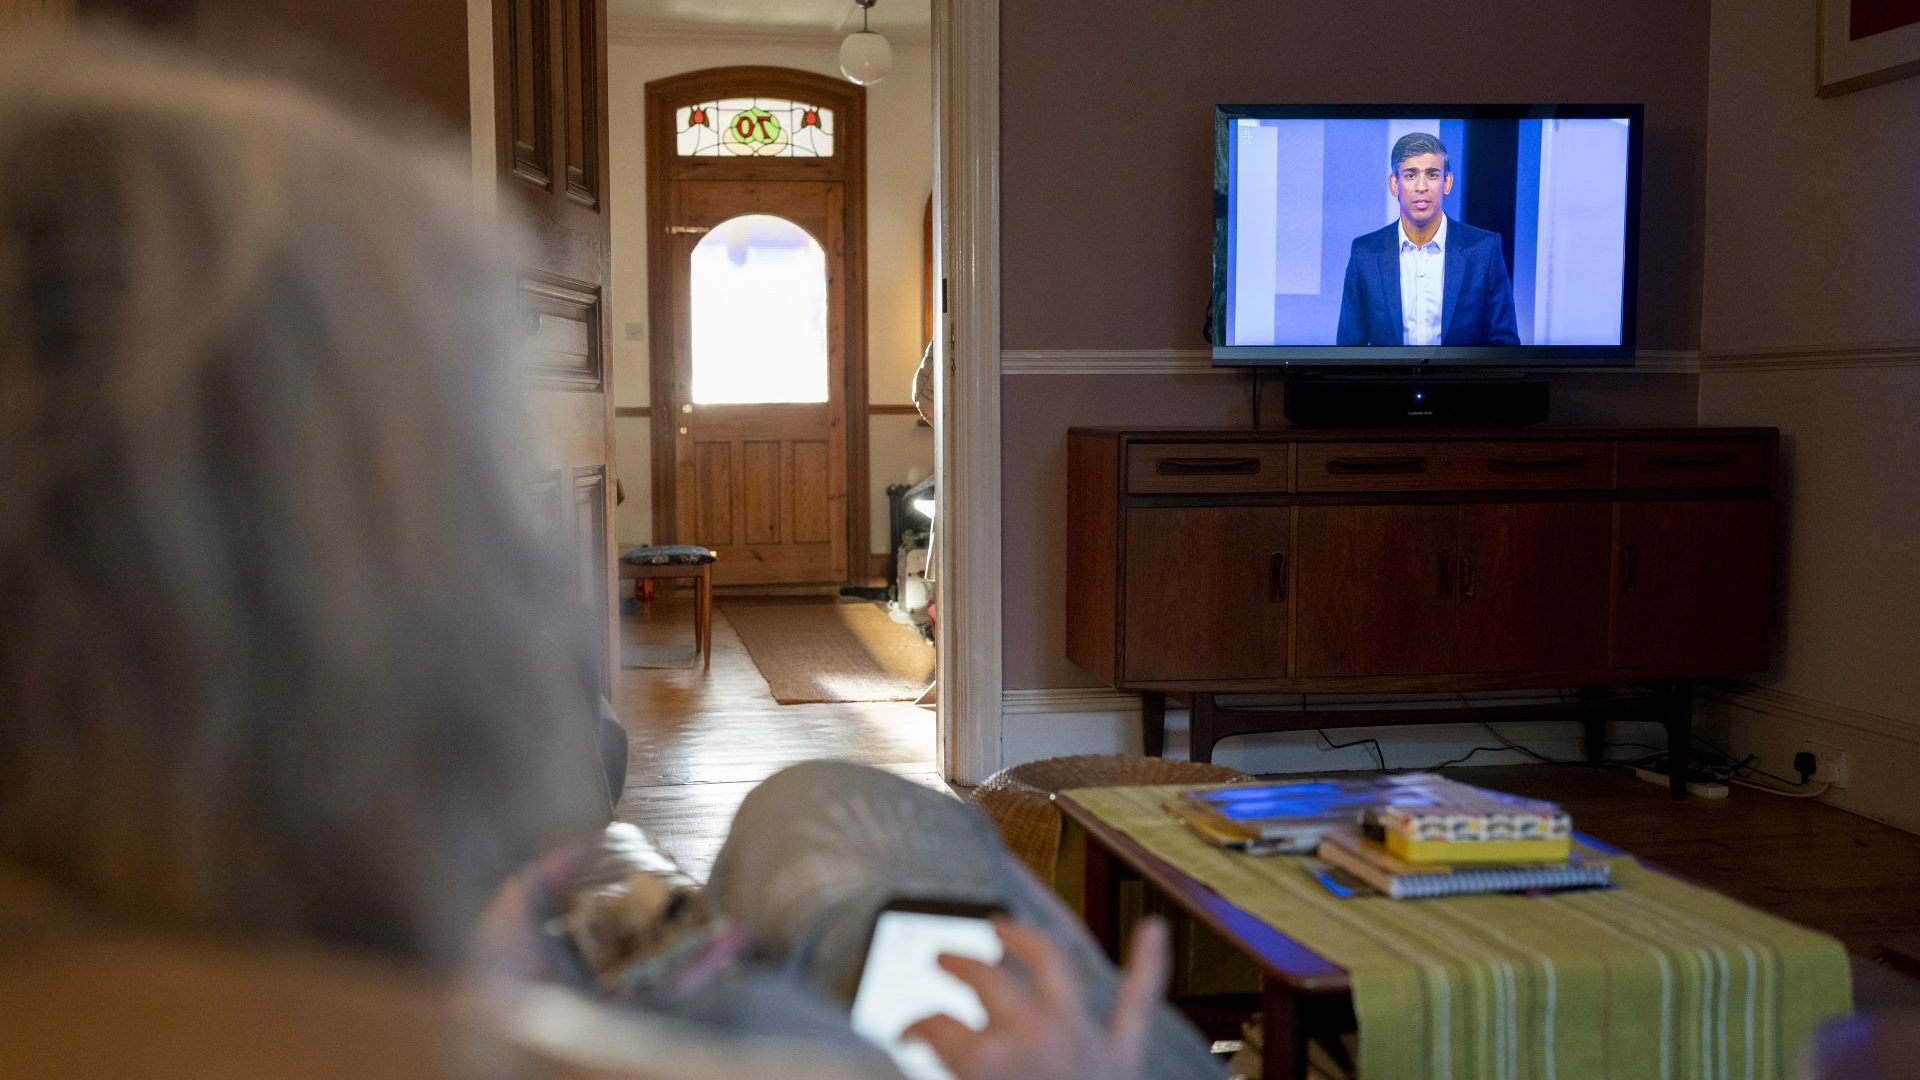 Rishi Sunak MP is seen on a TV screen during the first live TV Conservative party leadership debate on Channel 4 (Photo by Richard Baker / In Pictures via Getty Images)